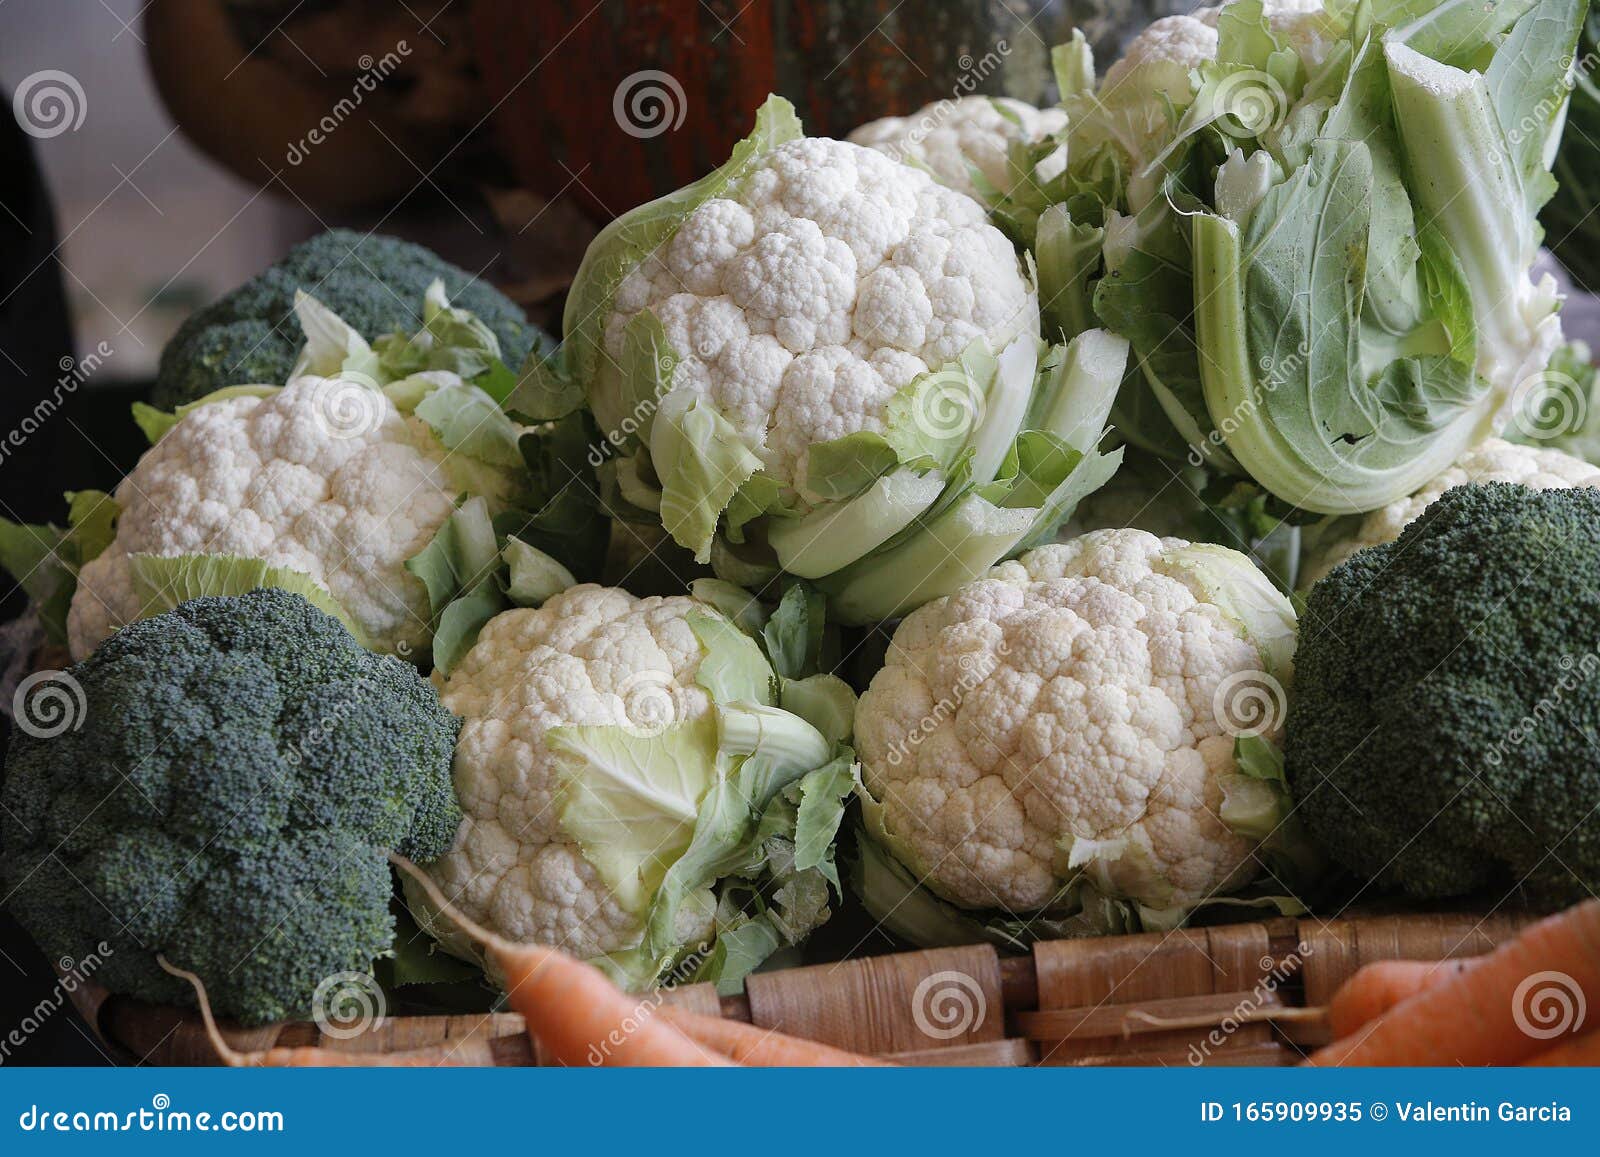 cauliflower at a vegetable stand